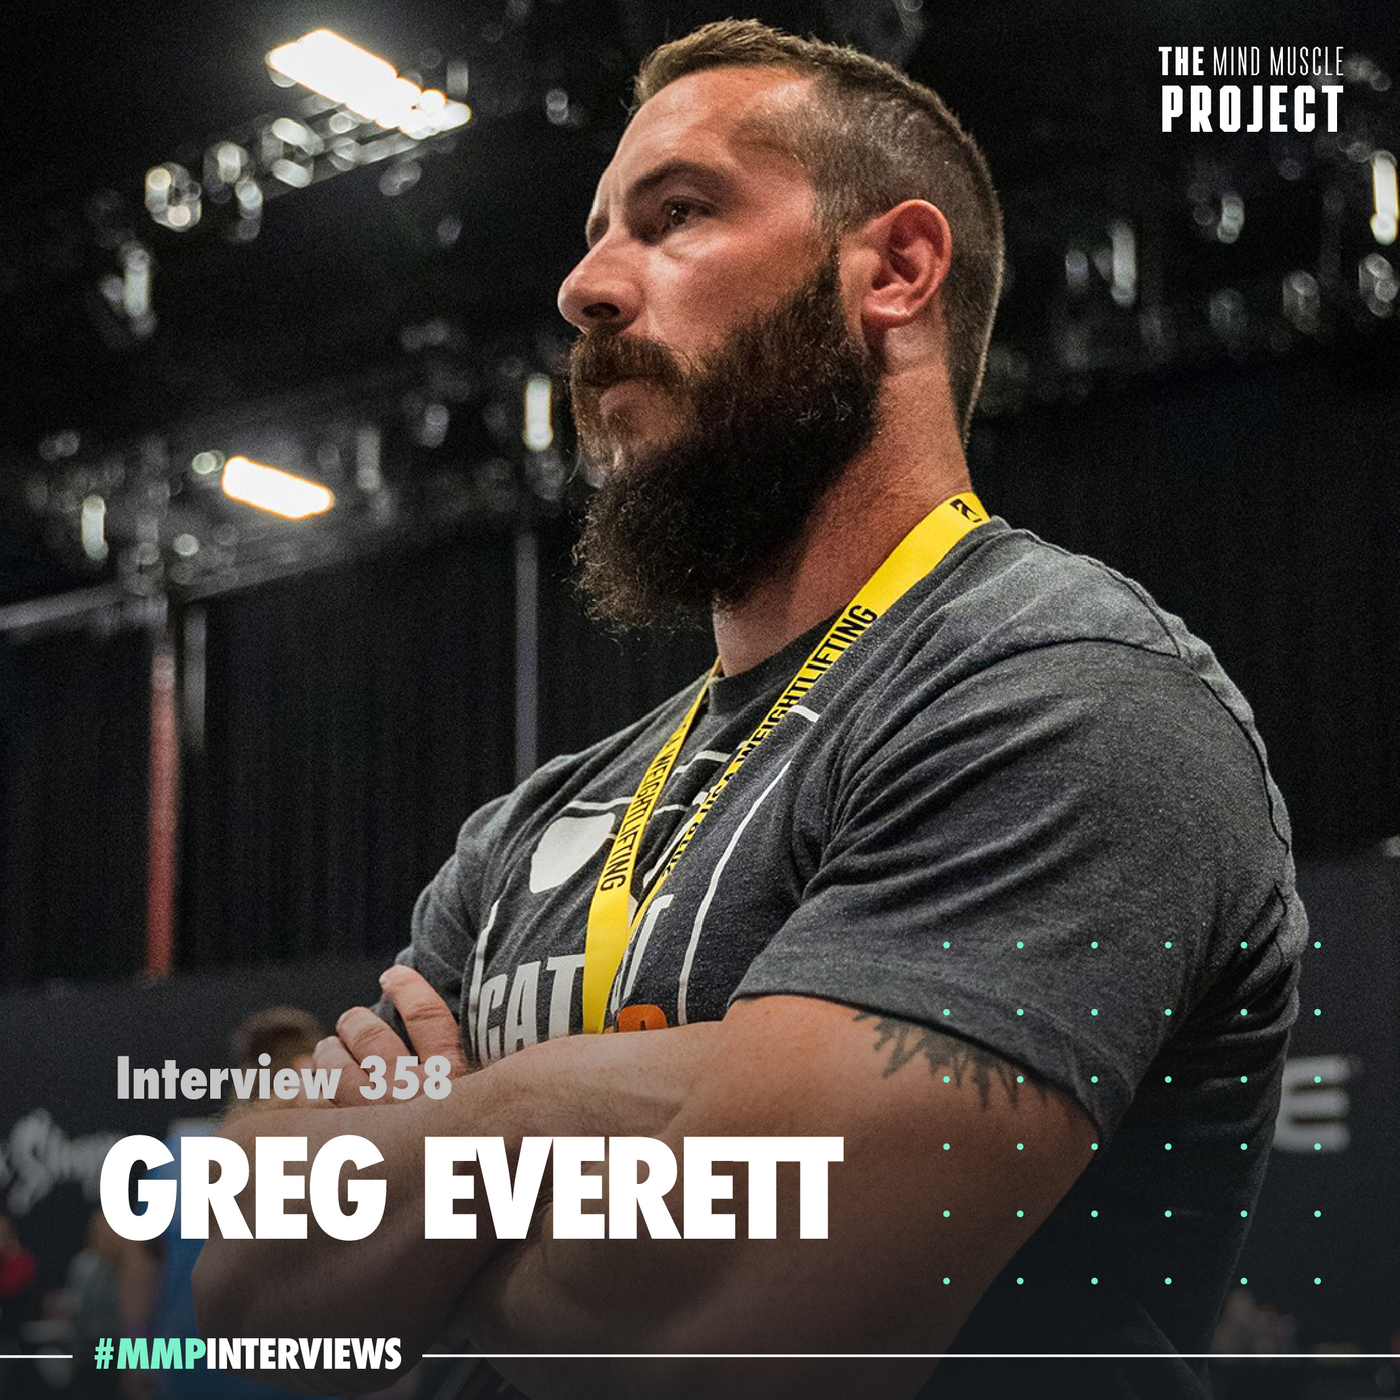 913: Greg Everett On The Future Of Weightlifting - Interview 358